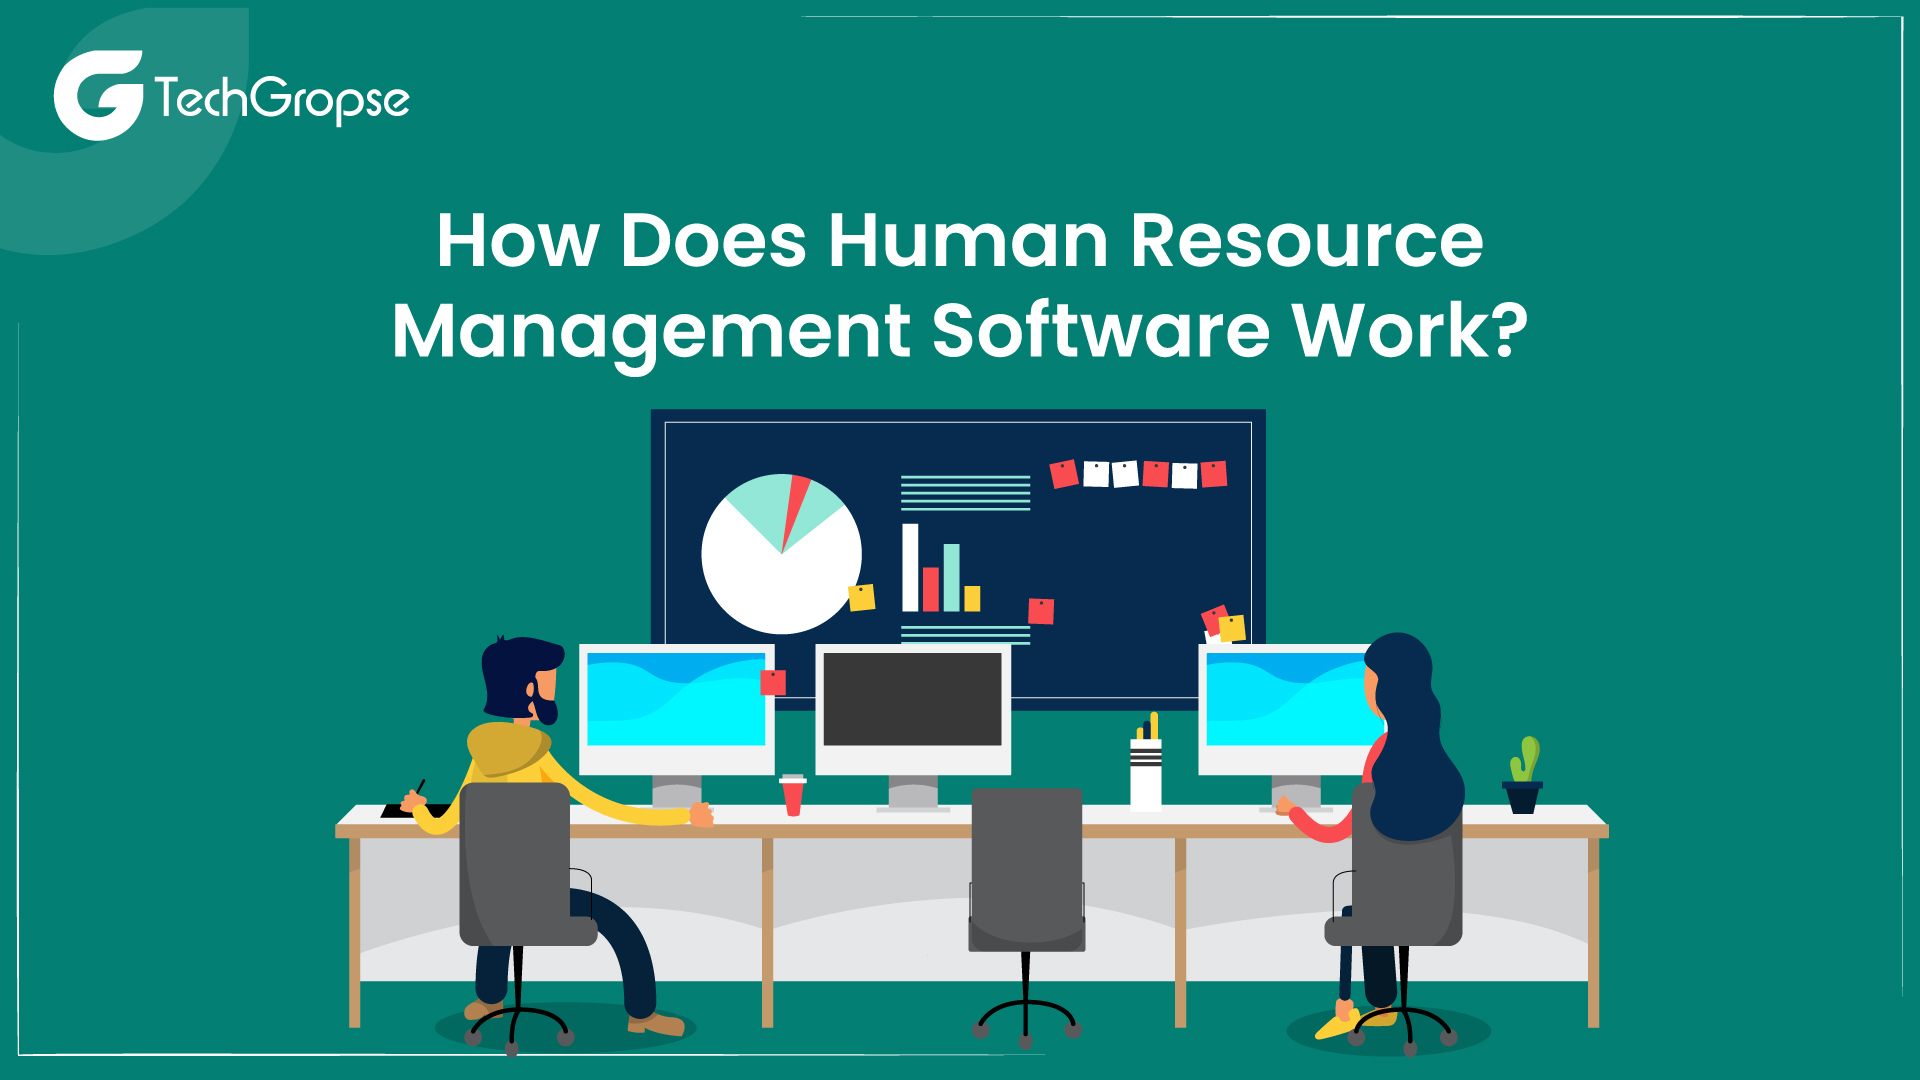 How Does Human Resource Management Software Work?